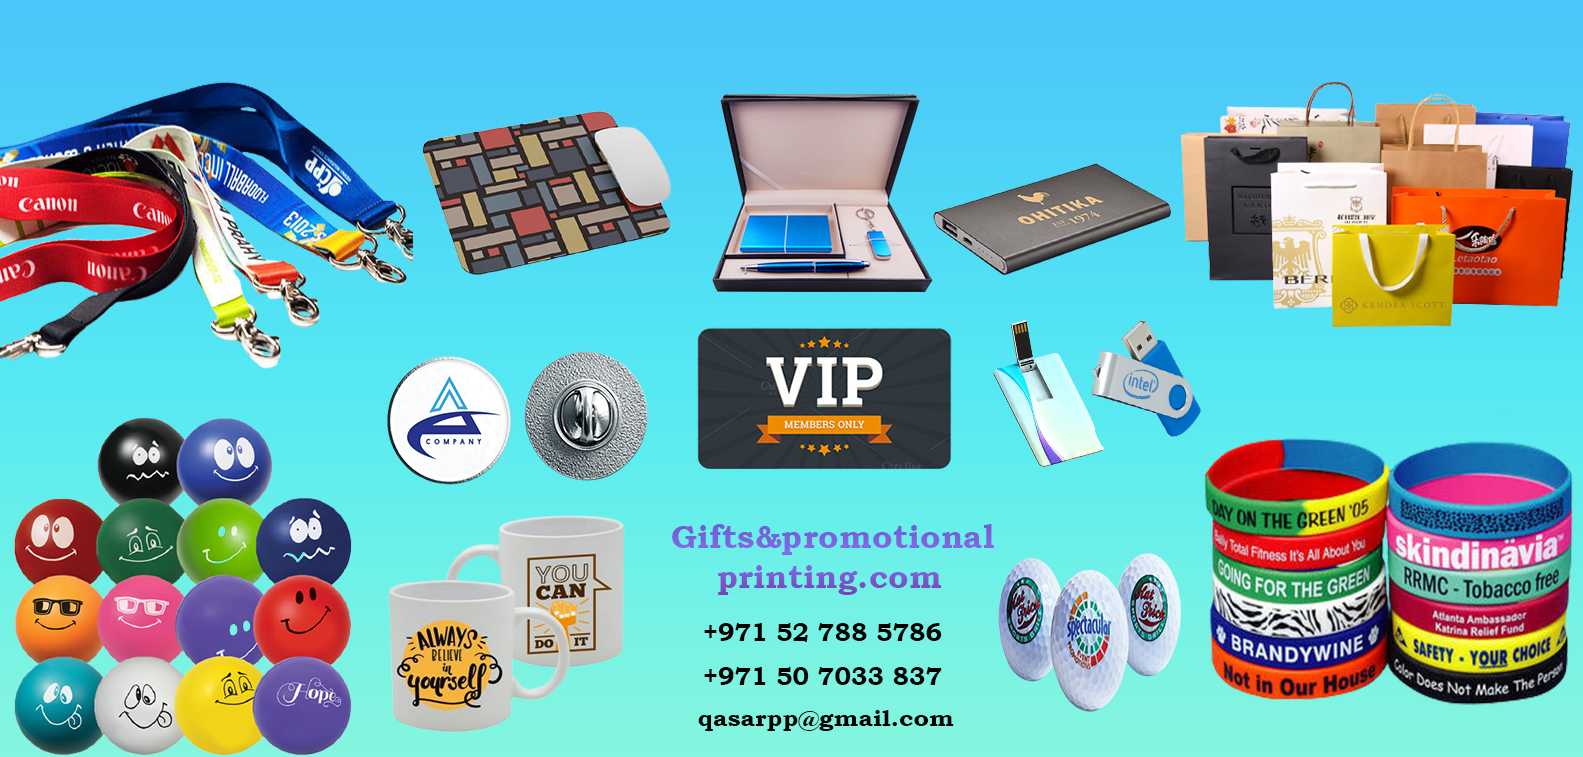 Gift-And-Promotional-Items-printing-Suppliers-in-Dubai-Sharjah-Ajman-Abudhabi-UAE-Middle-East